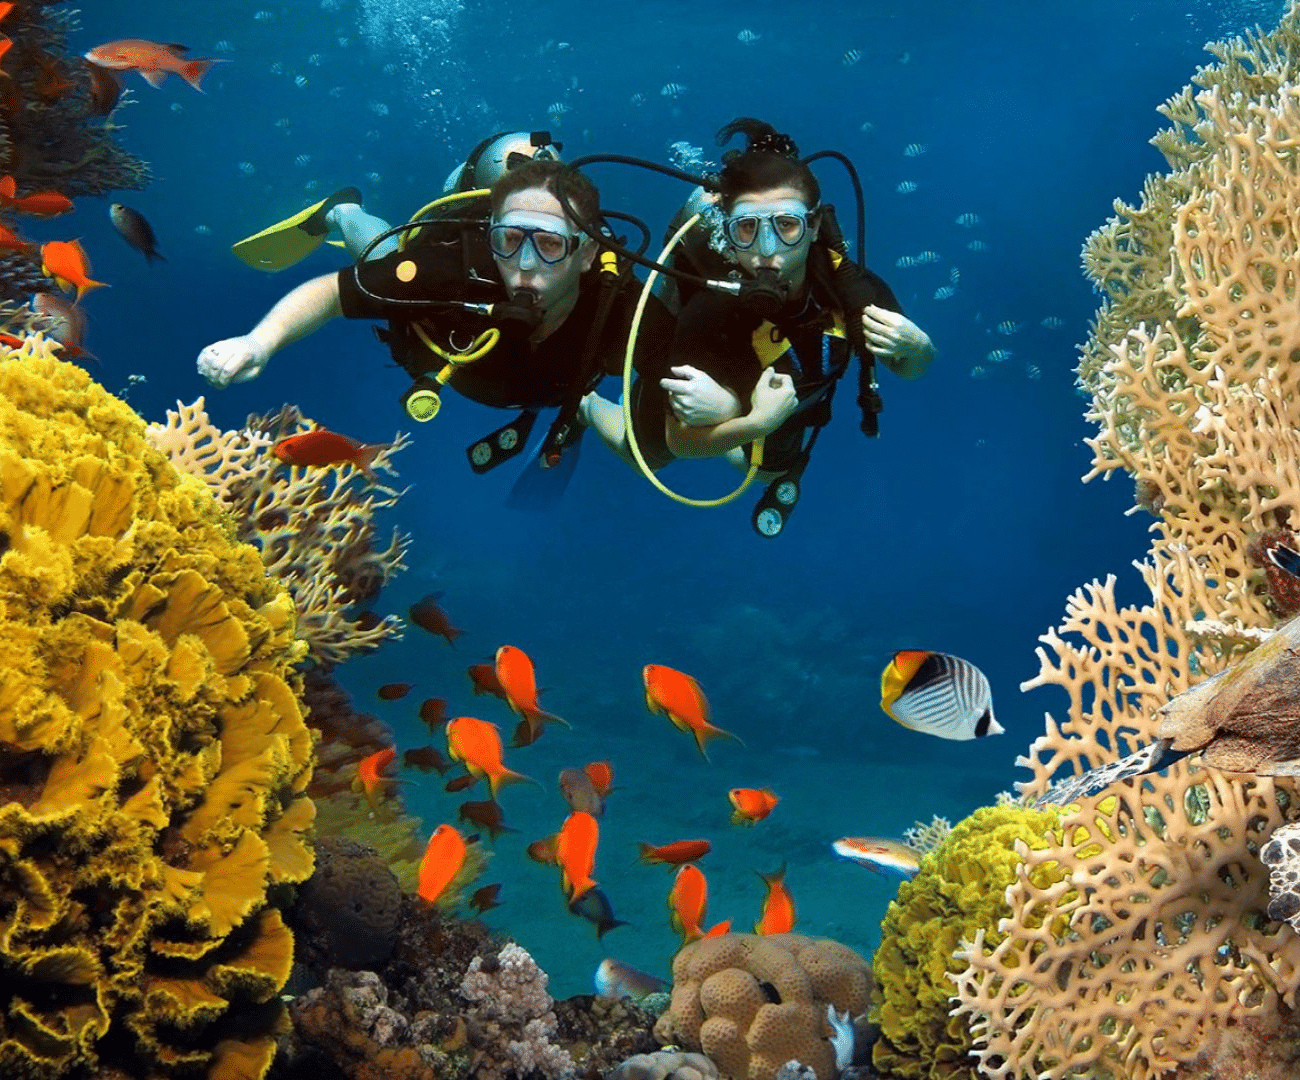 Scuba diving included in our maldives tour package